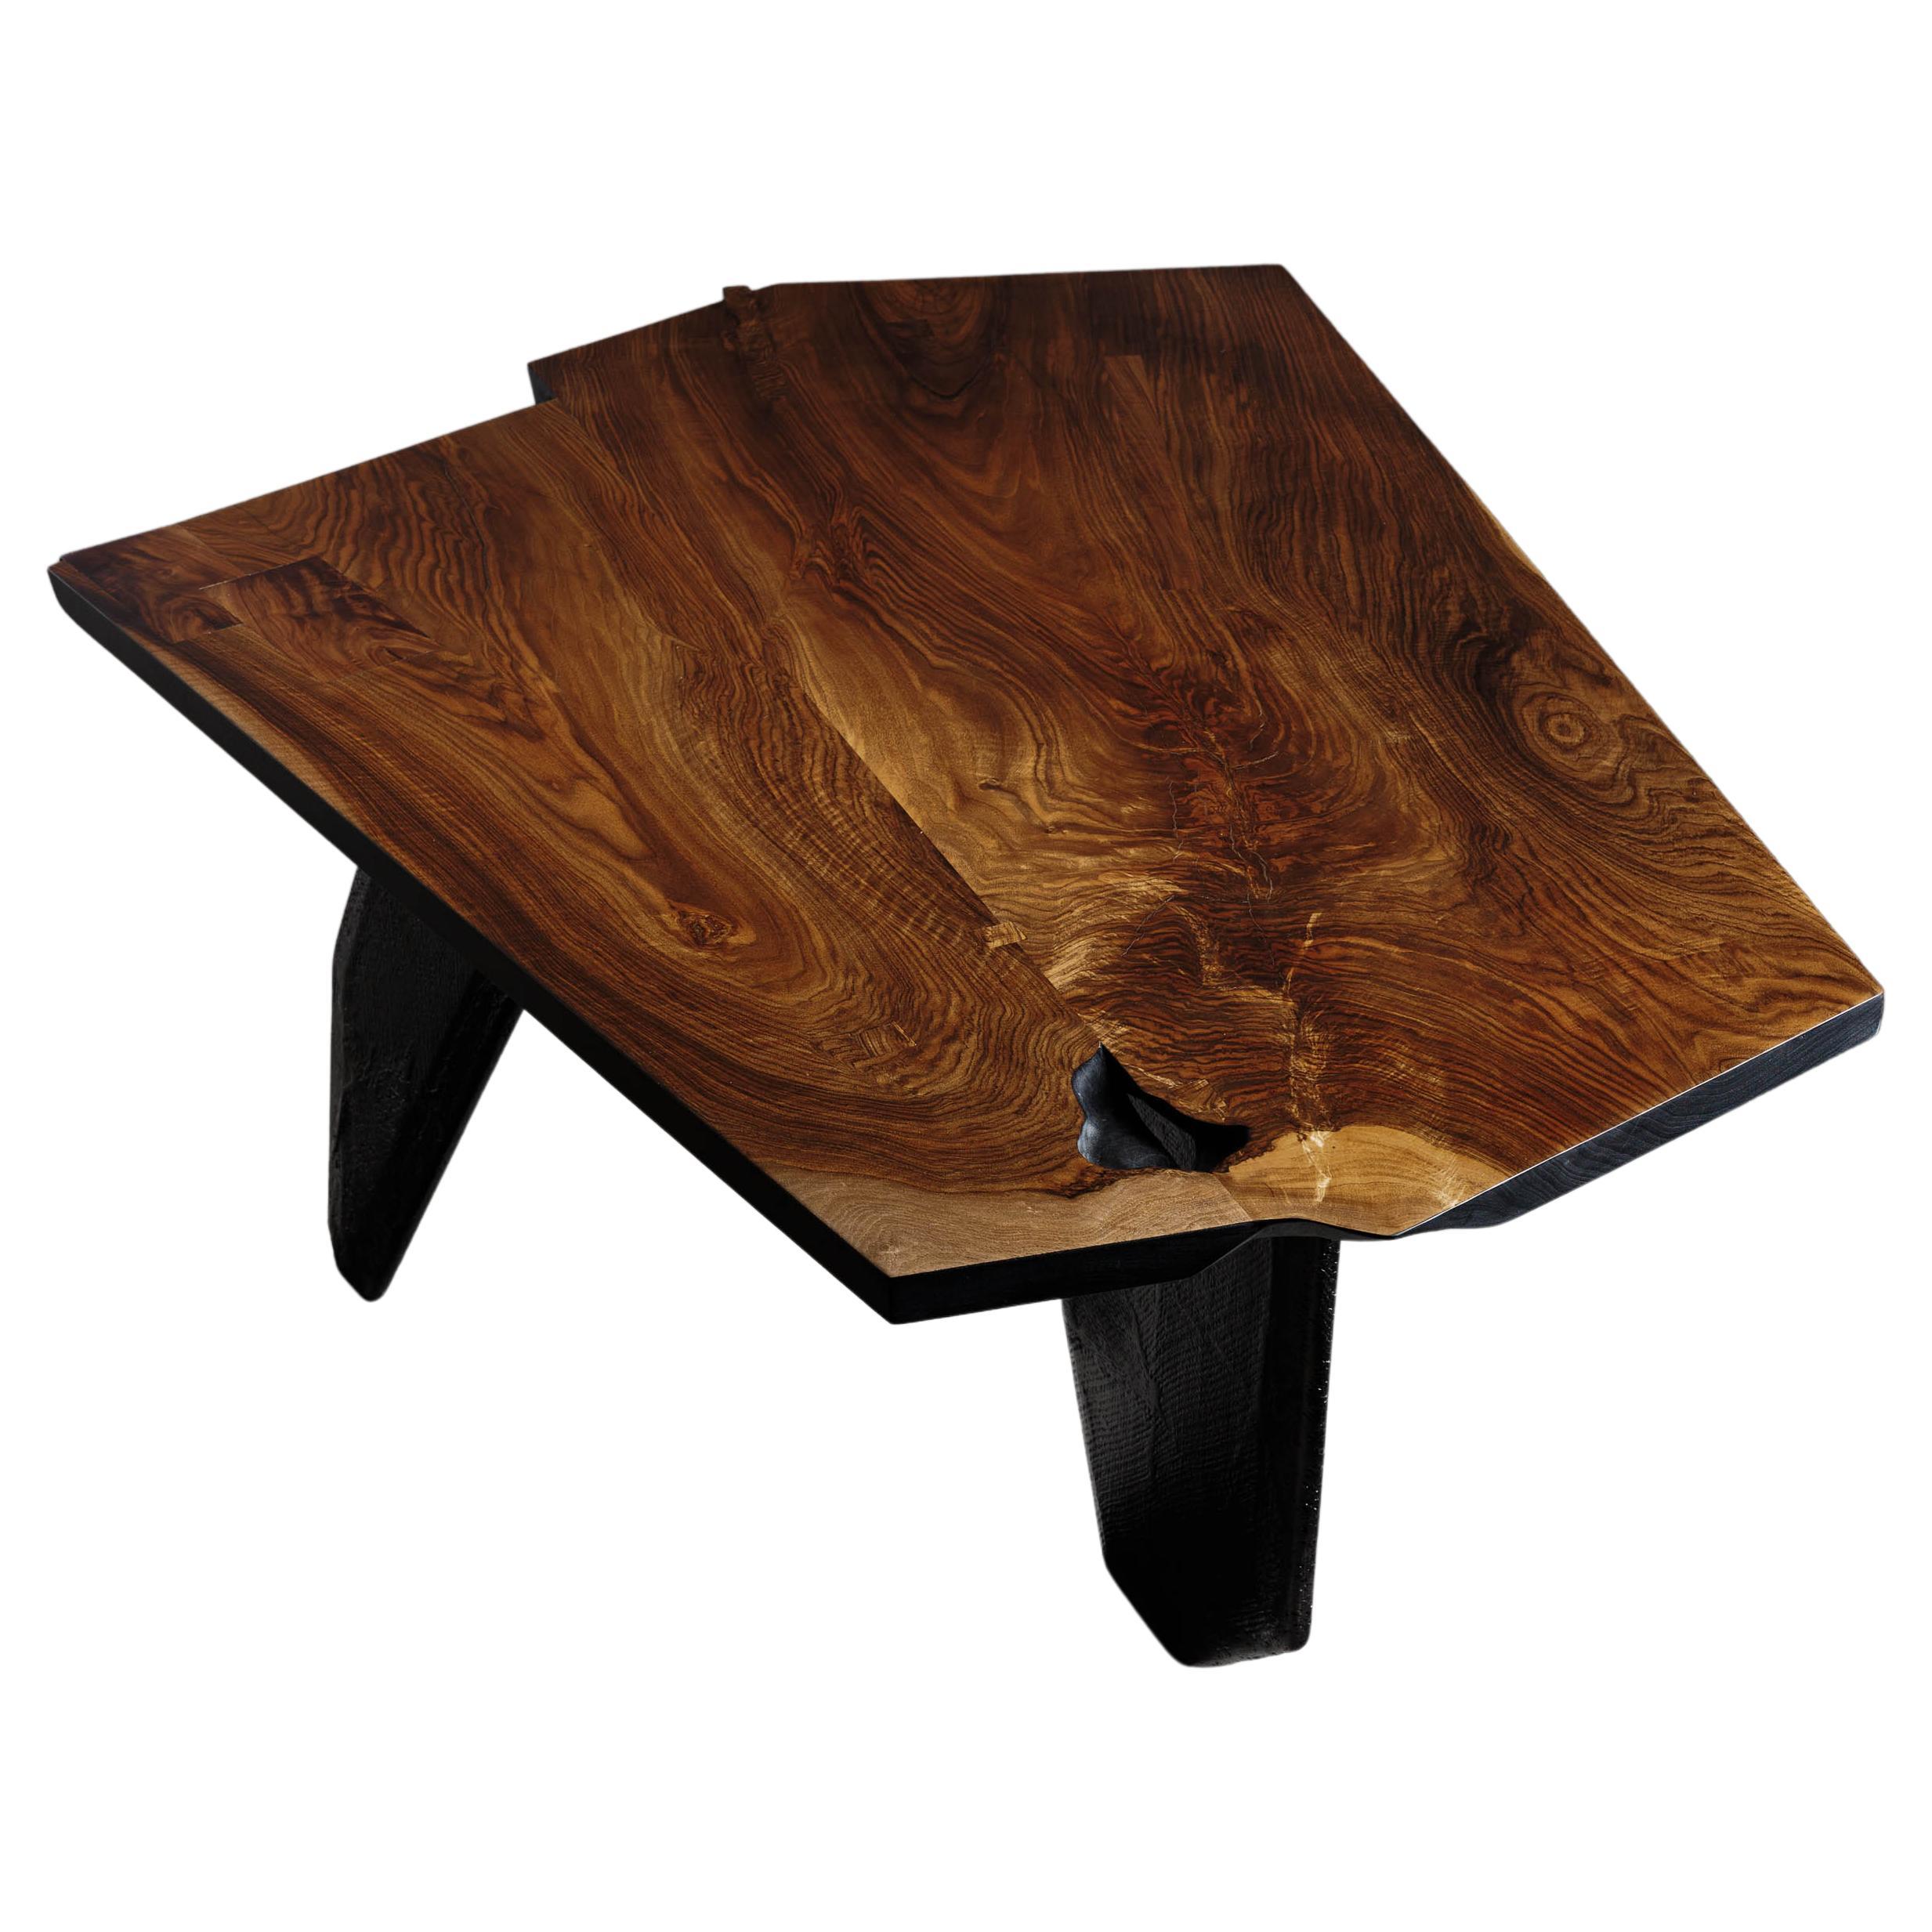 Eero Moss Small Walnut Dining Table, EM206 For Sale